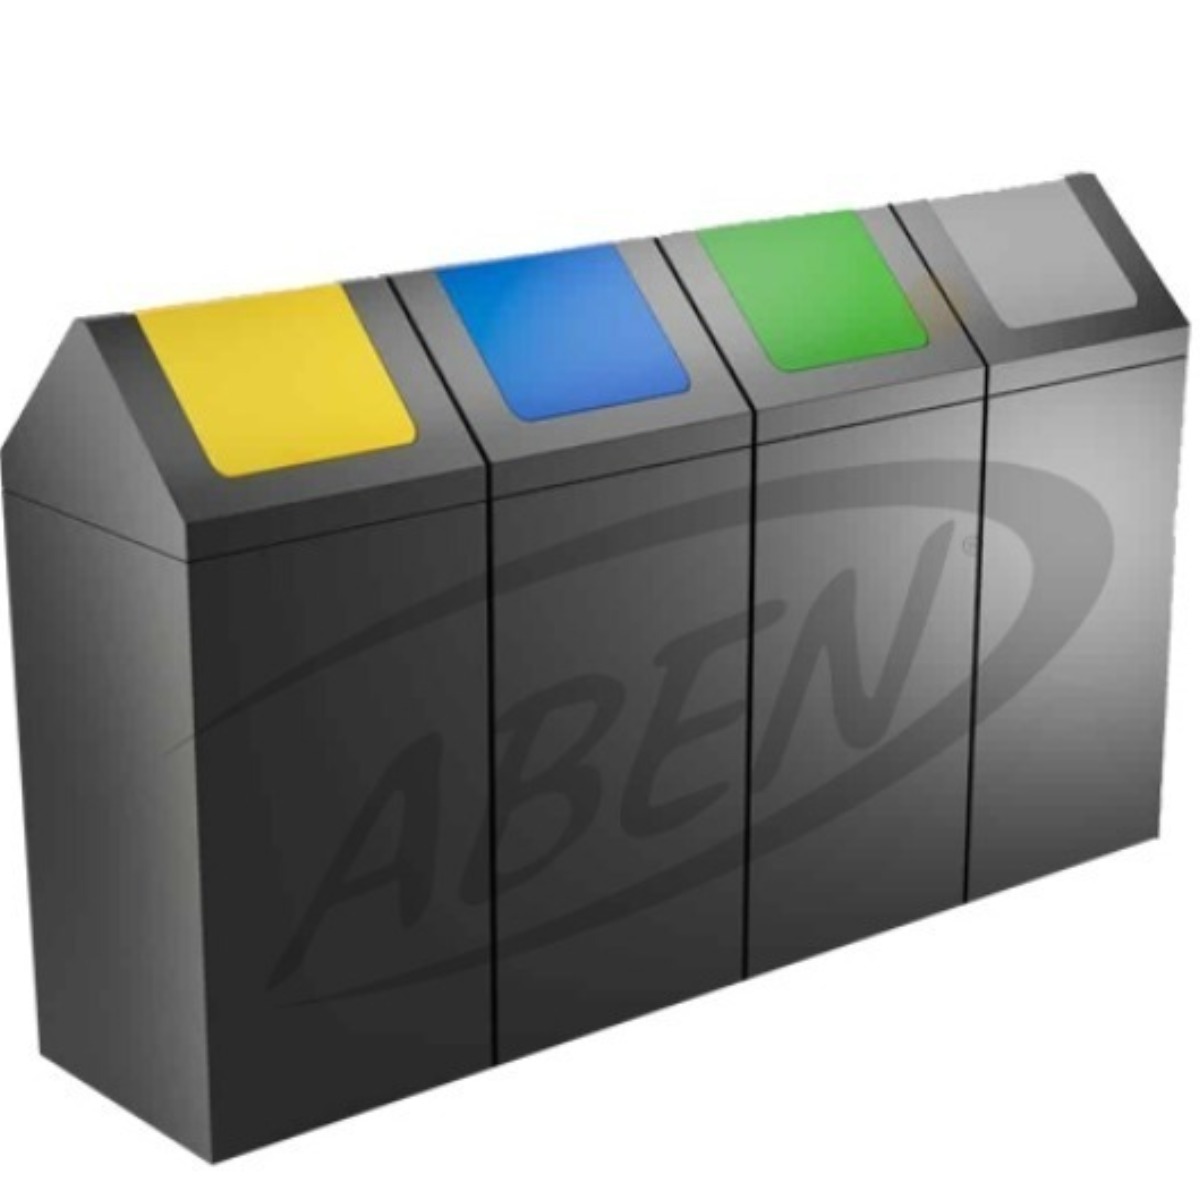 AB-771 4'Part Recycle Bin